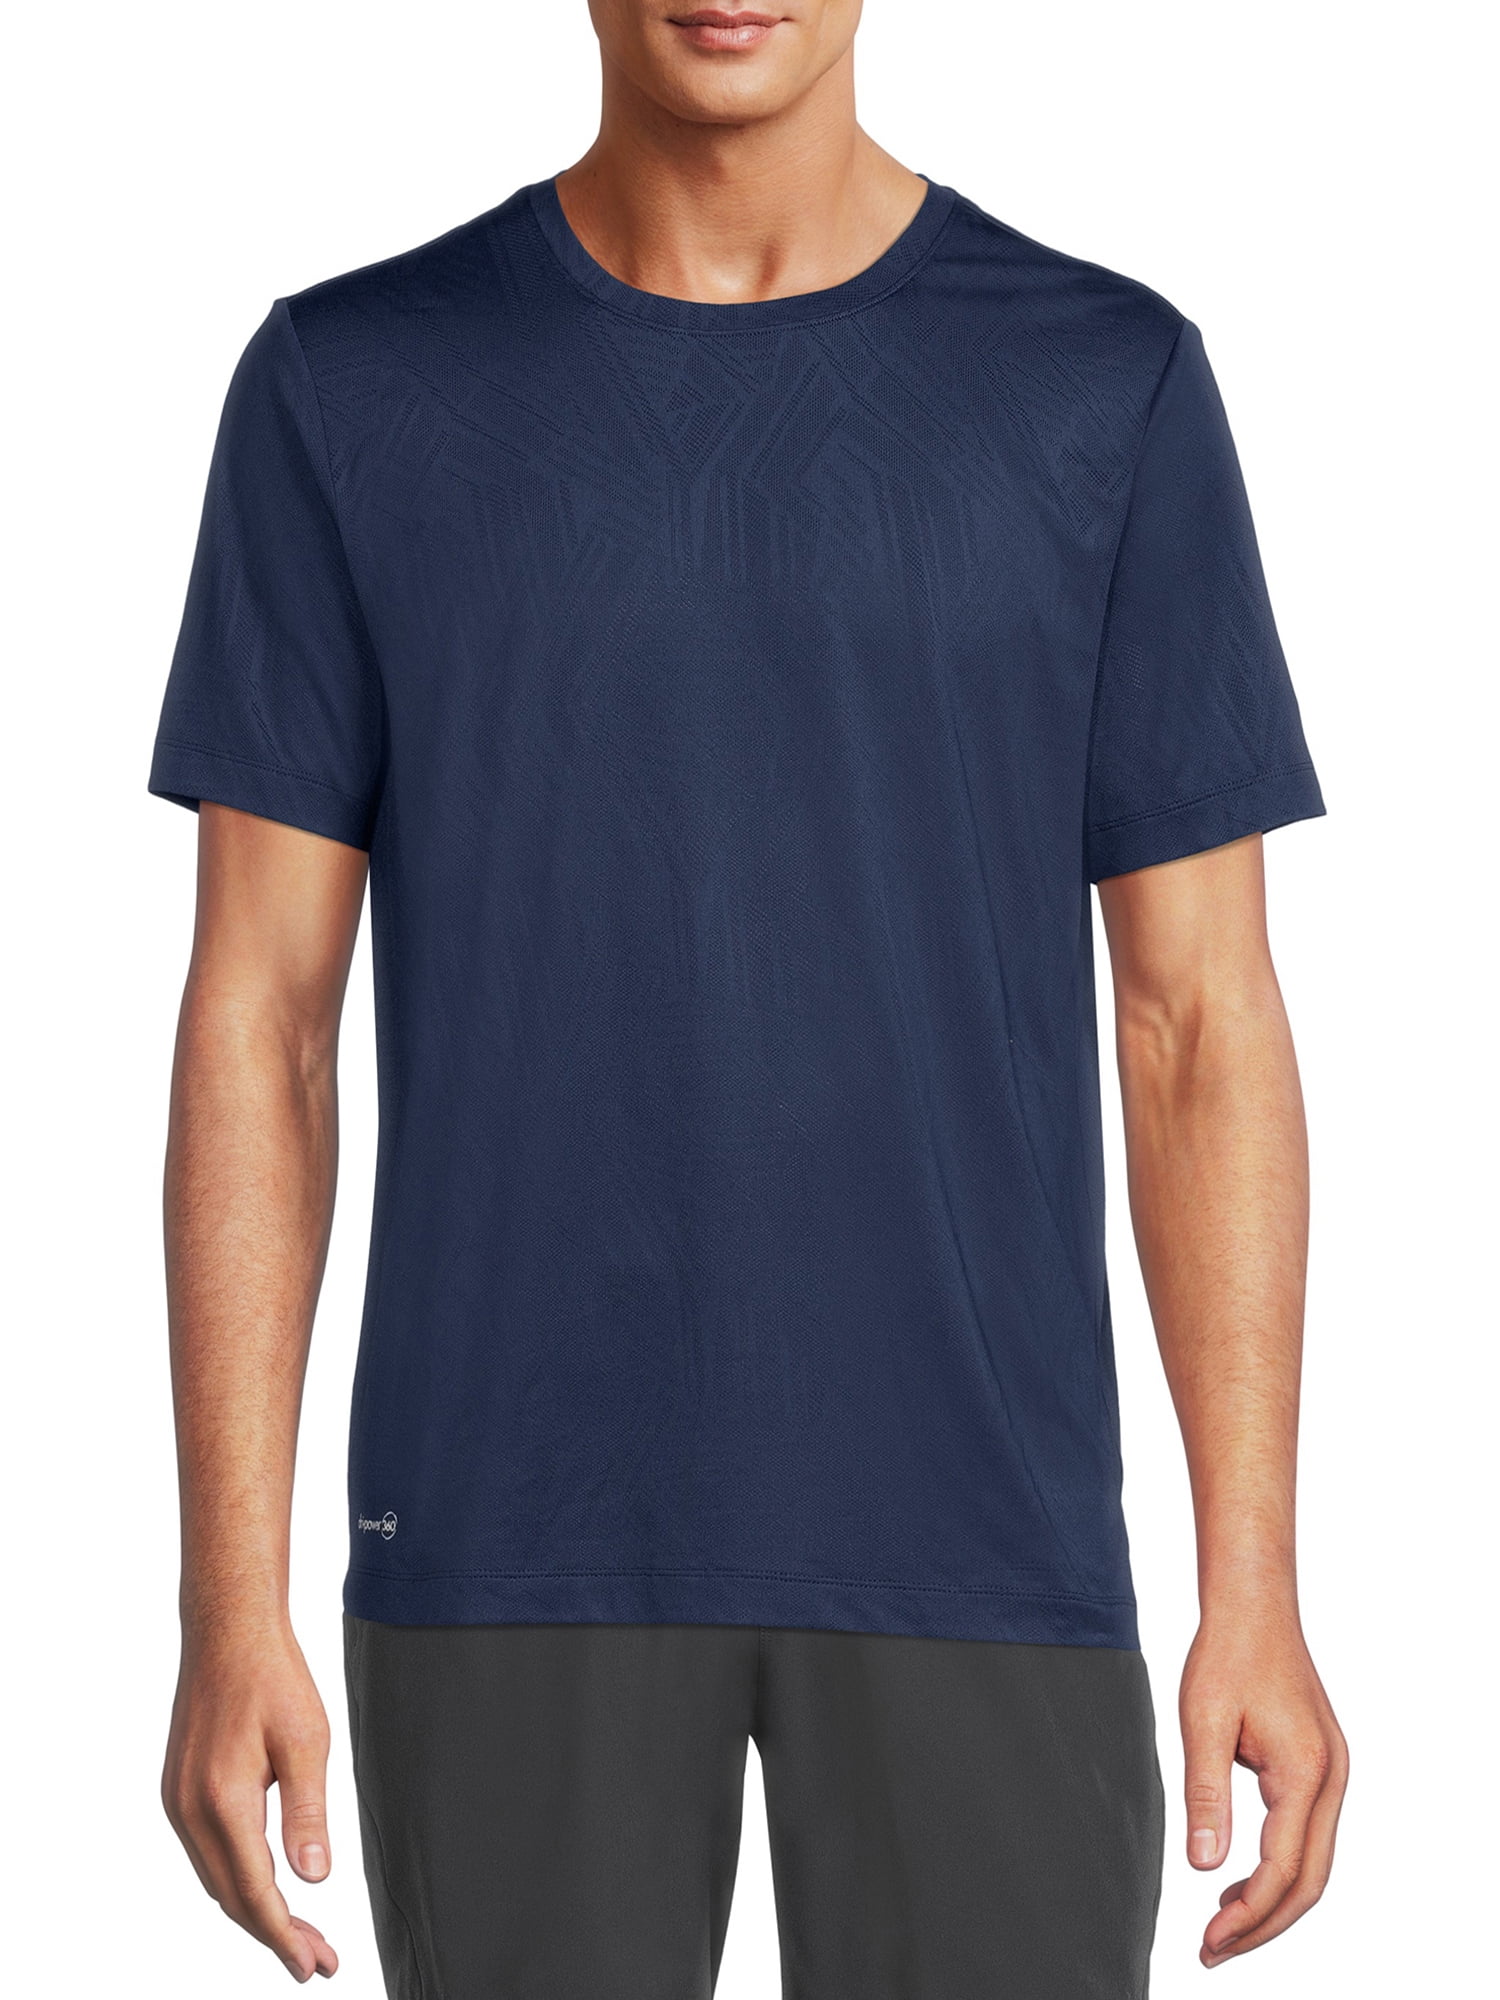 Russell Men's and Big Men's Active Jacquard T-Shirt with Short Sleeves ...